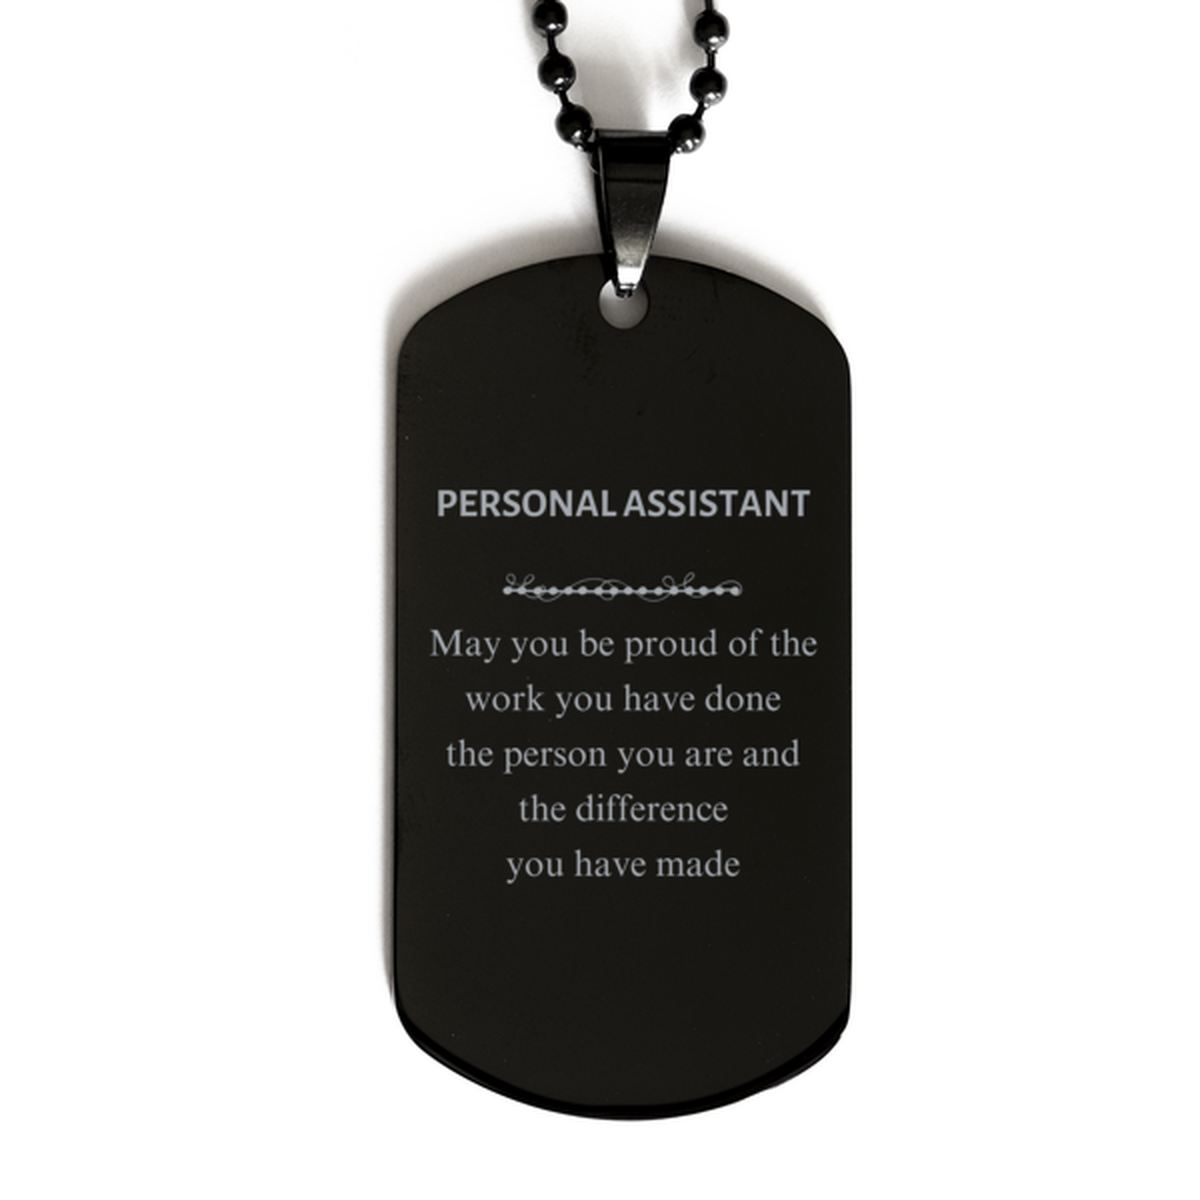 Personal Assistant May you be proud of the work you have done, Retirement Personal Assistant Black Dog Tag for Colleague Appreciation Gifts Amazing for Personal Assistant